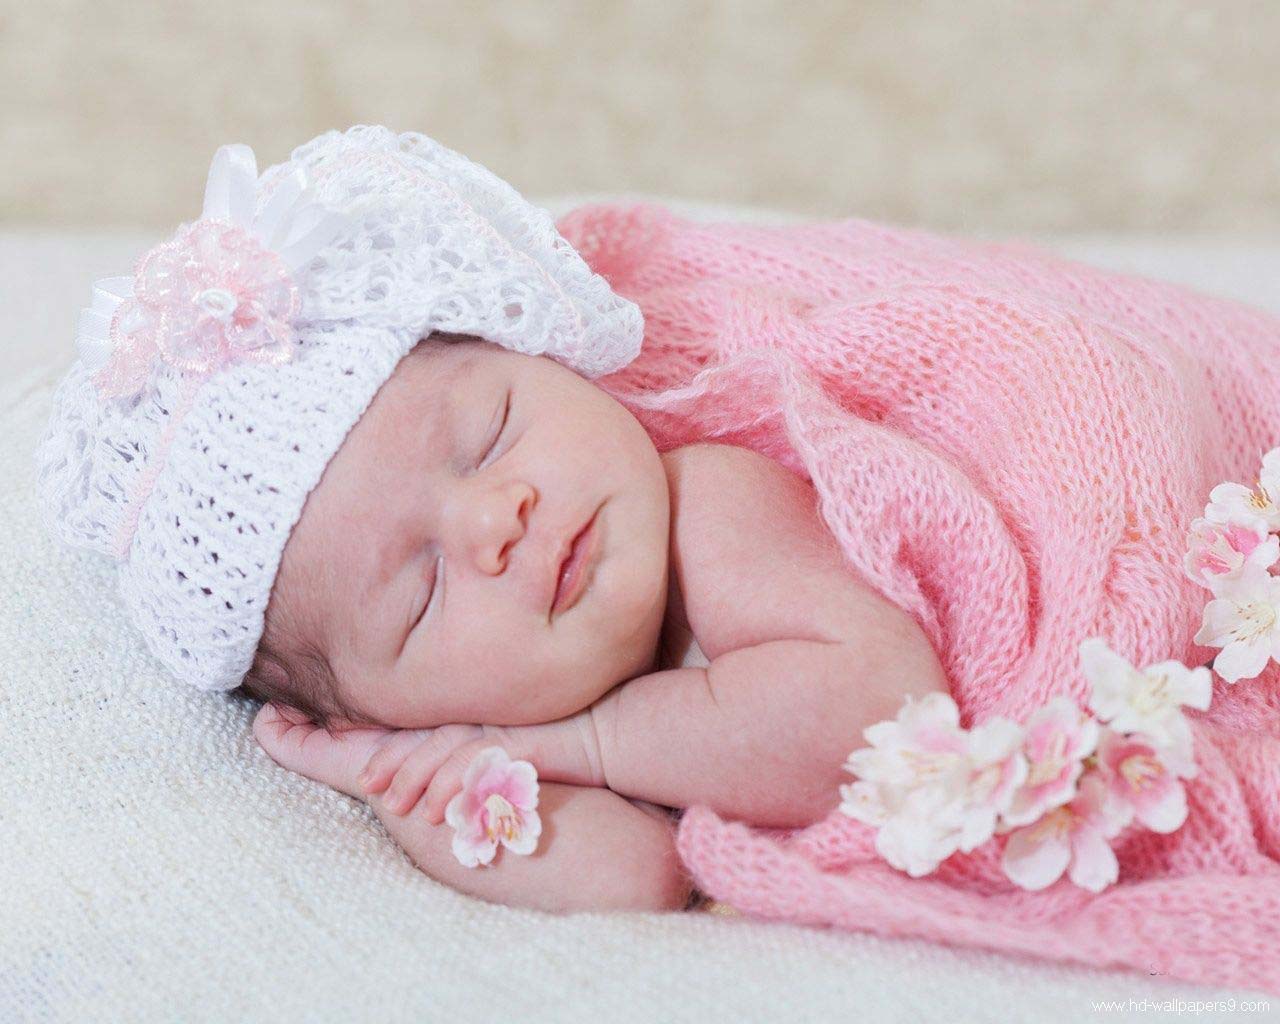  Cute  and Lovely Baby  Pictures Free Download Love  Images  